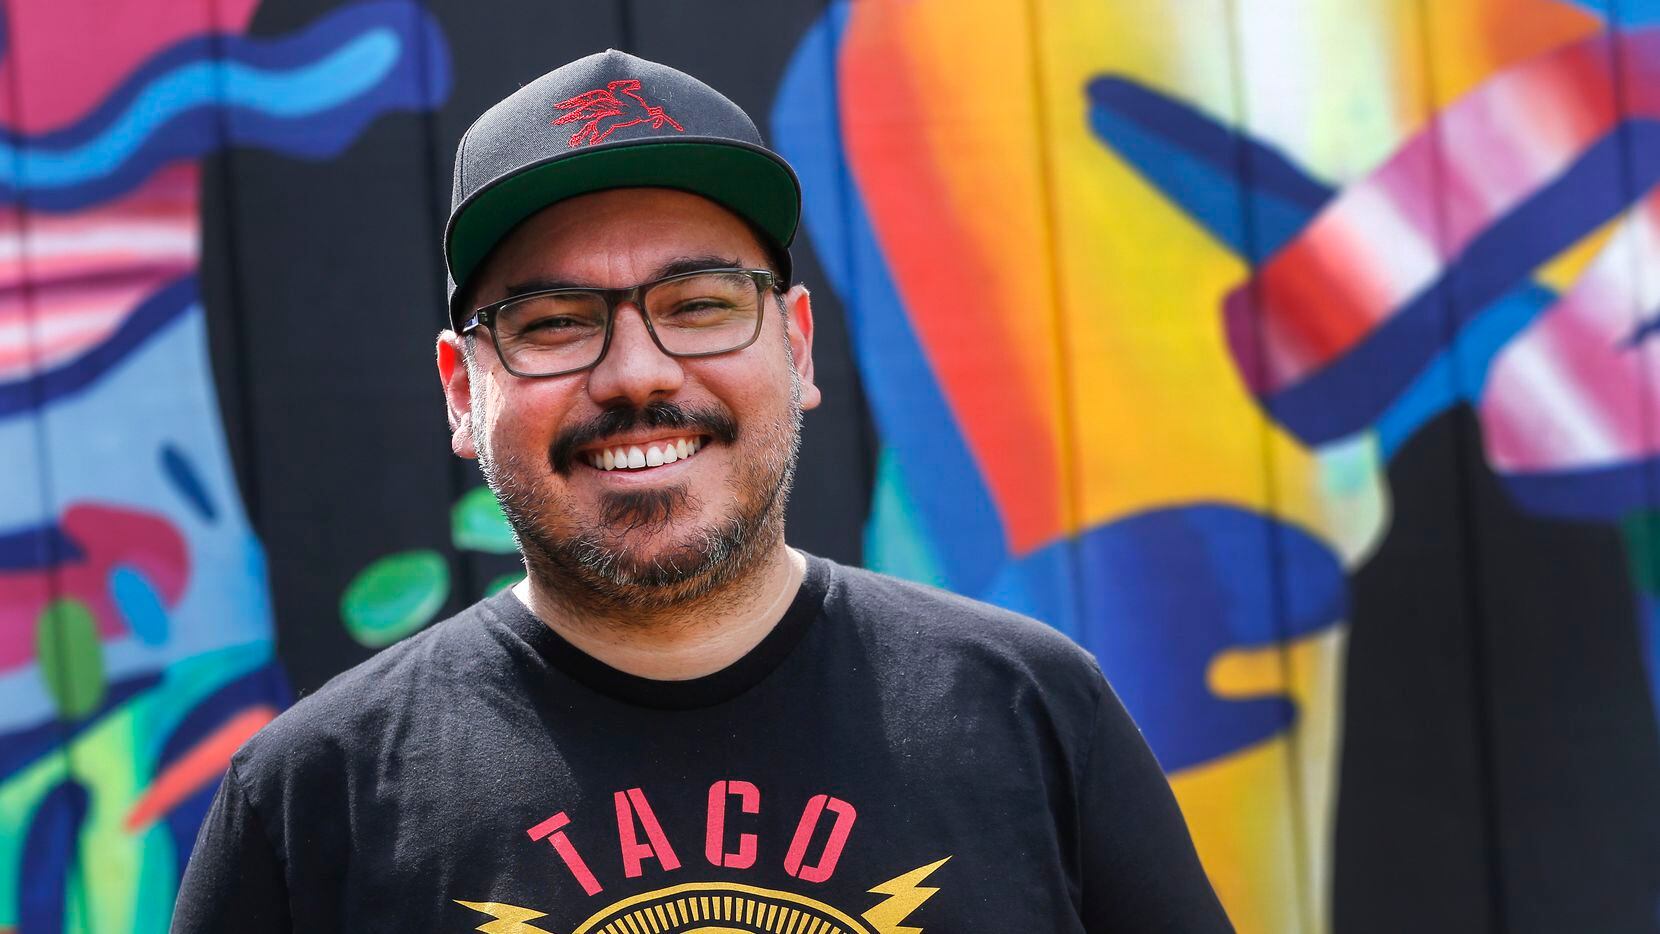 José Ralat is the taco editor at Texas Monthly